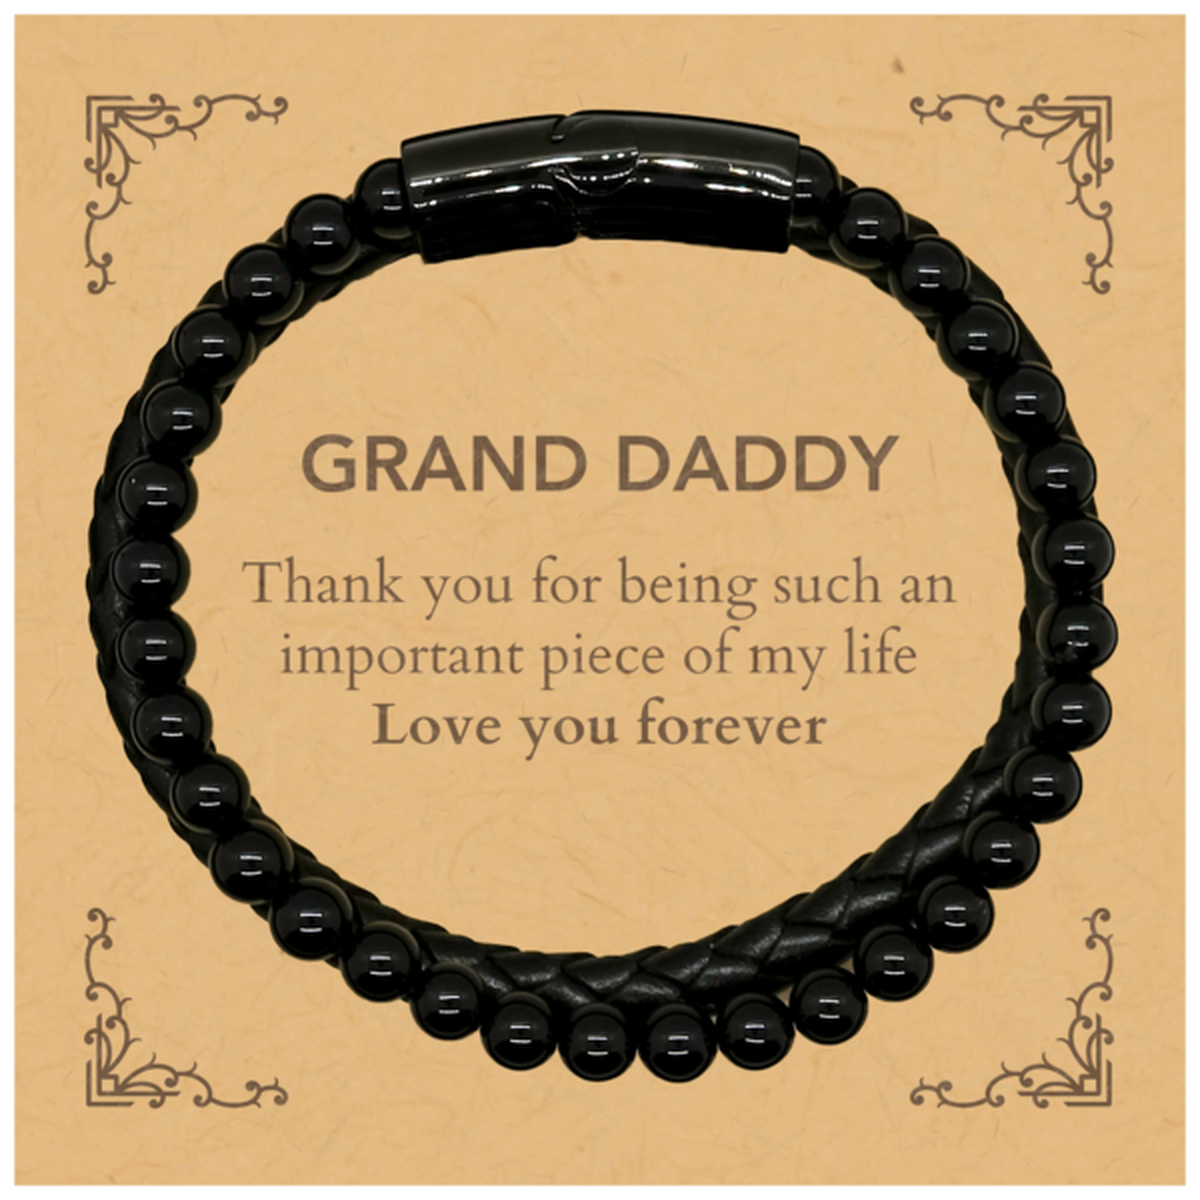 Appropriate Grand Daddy Stone Leather Bracelets Epic Birthday Gifts for Grand Daddy Thank you for being such an important piece of my life Grand Daddy Christmas Mothers Fathers Day